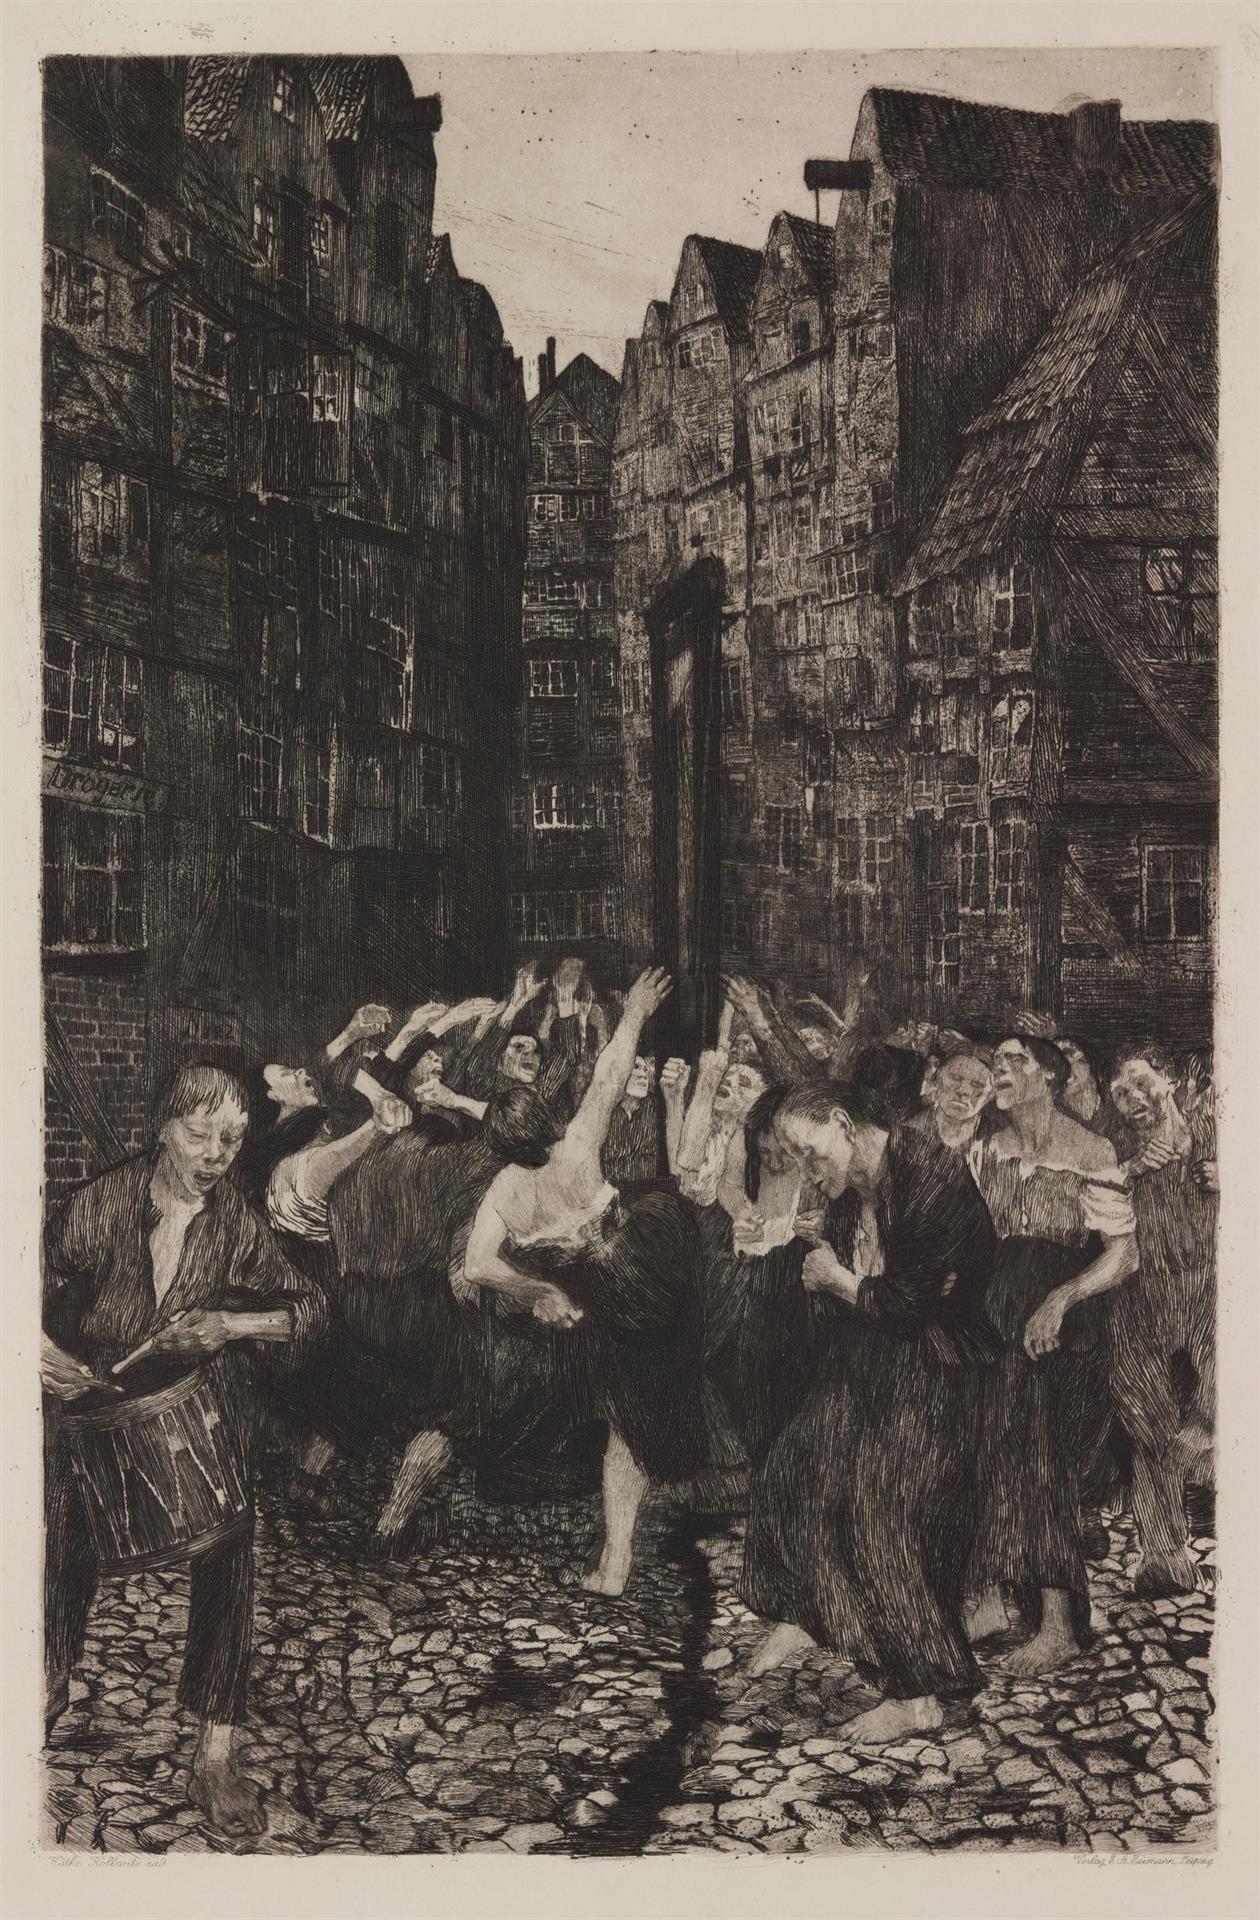 Käthe Kollwitz, Carmagnole, 1910, line etching, drypoint, aquatint, brush etching and emery, Kn 51, Cologne Kollwitz Collection © Käthe Kollwitz Museum Köln